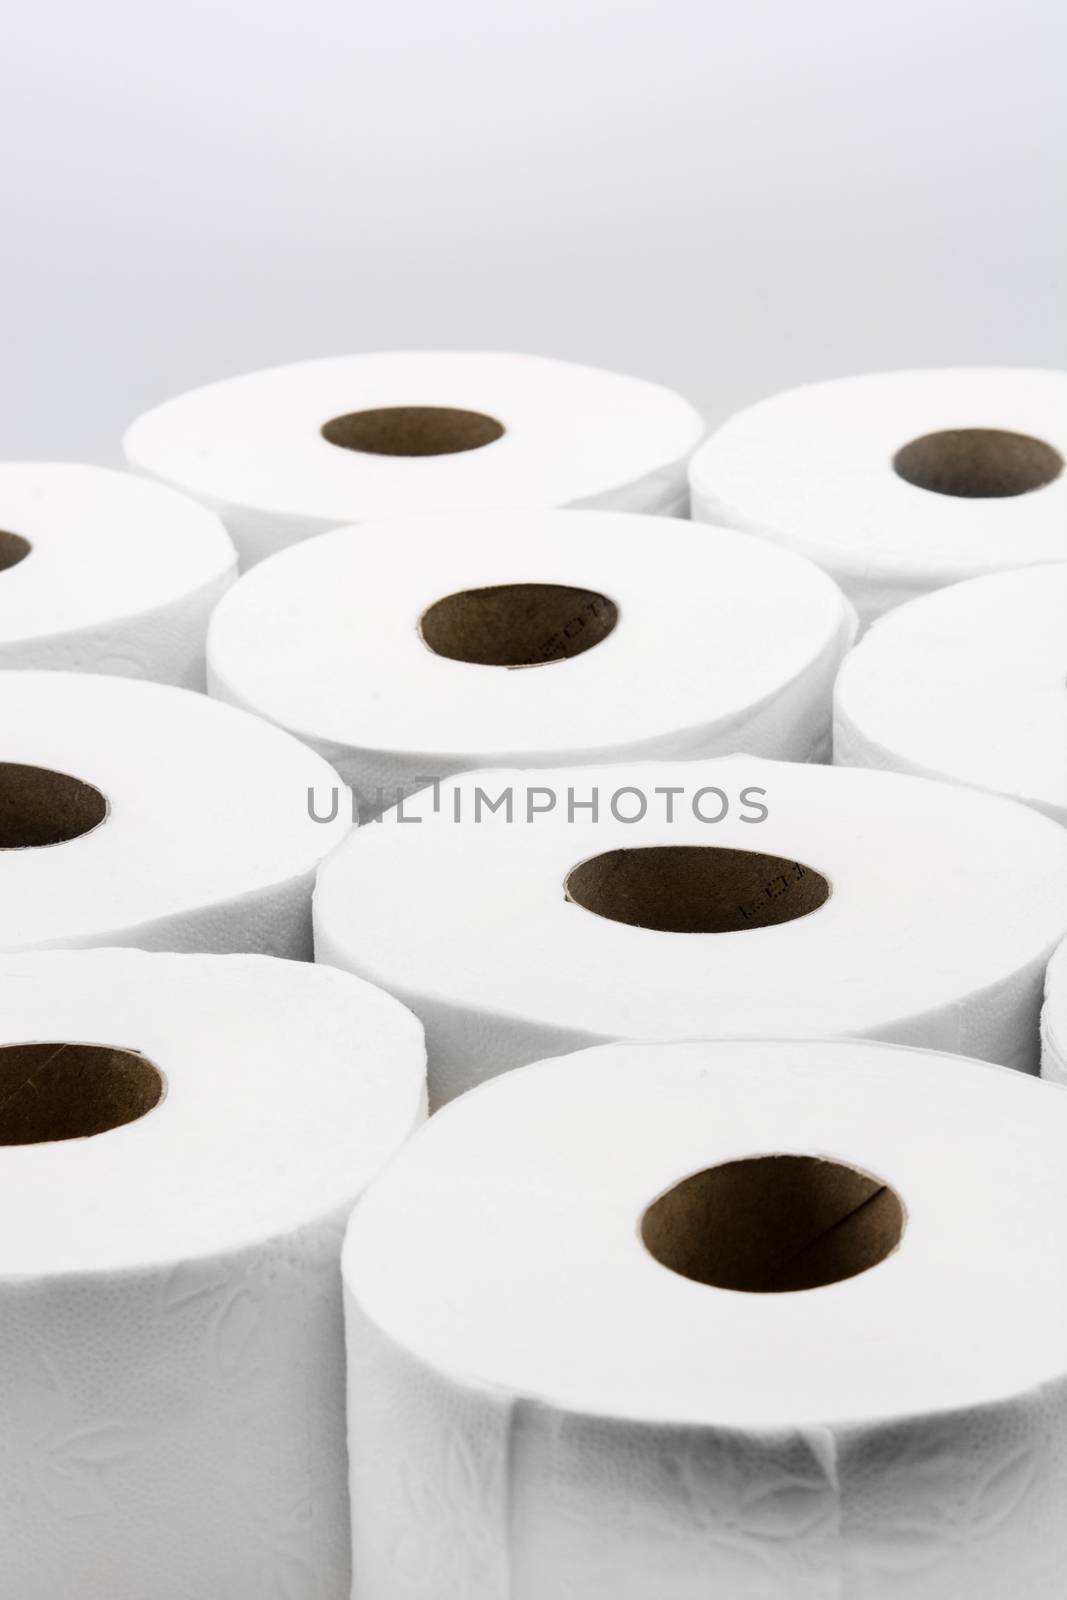 Toilet paper rolls background by chandlervid85